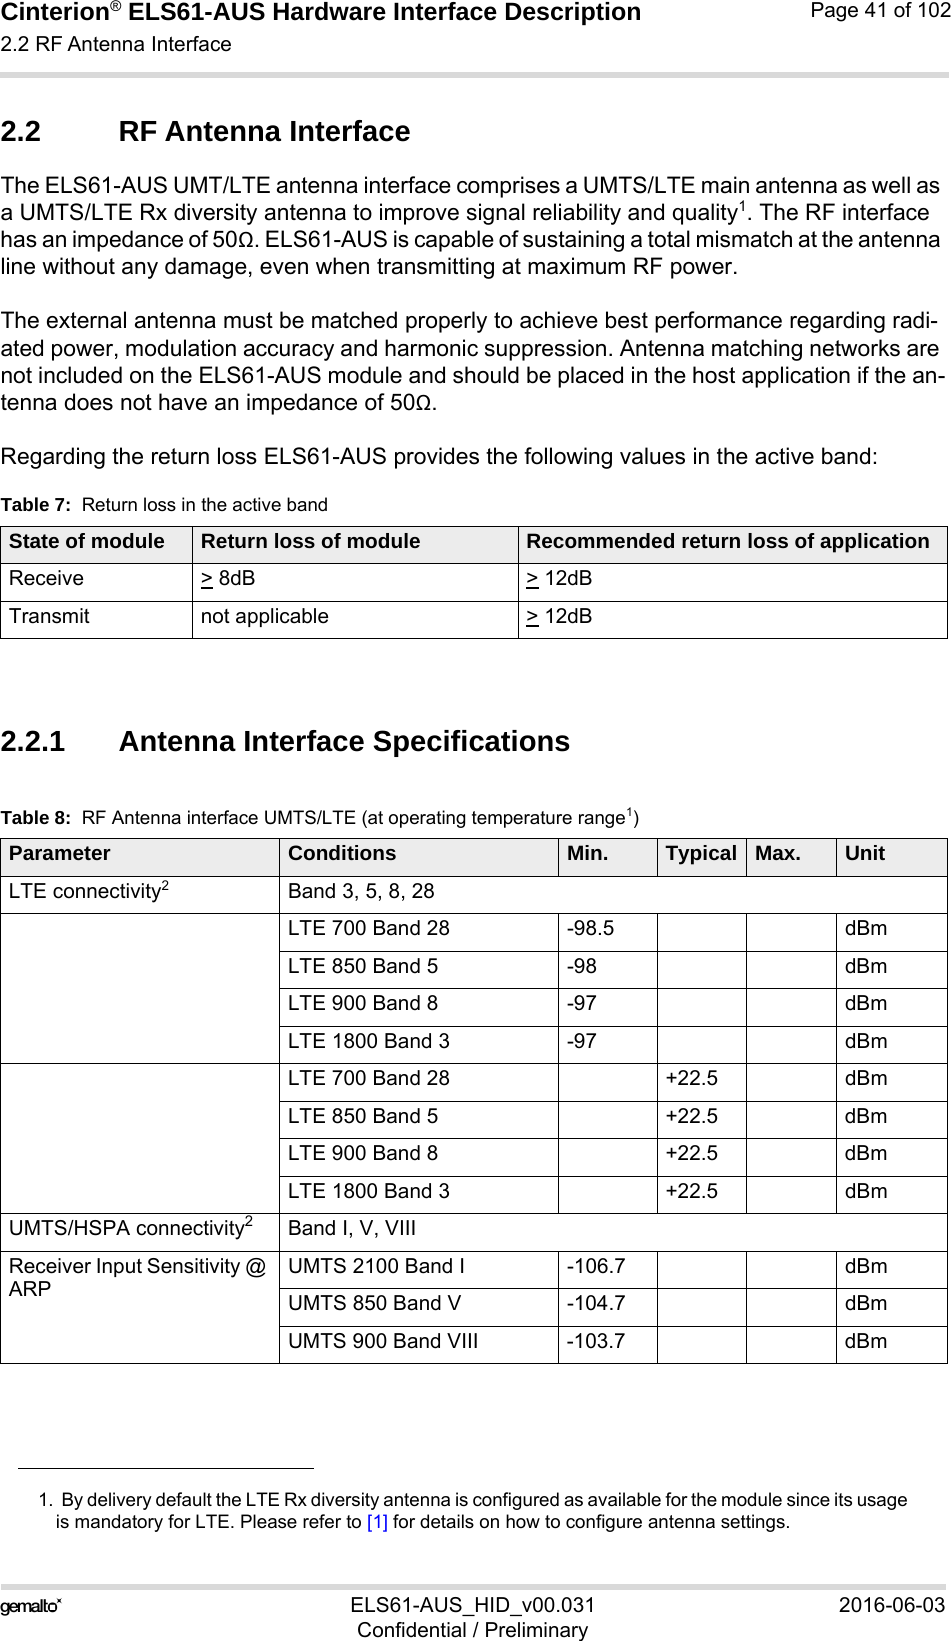 Cinterion® ELS61-AUS Hardware Interface Description2.2 RF Antenna Interface52ELS61-AUS_HID_v00.031 2016-06-03Confidential / PreliminaryPage 41 of 1022.2 RF Antenna InterfaceThe ELS61-AUS UMT/LTE antenna interface comprises a UMTS/LTE main antenna as well as a UMTS/LTE Rx diversity antenna to improve signal reliability and quality1. The RF interface has an impedance of 50Ω. ELS61-AUS is capable of sustaining a total mismatch at the antenna line without any damage, even when transmitting at maximum RF power.The external antenna must be matched properly to achieve best performance regarding radi-ated power, modulation accuracy and harmonic suppression. Antenna matching networks are not included on the ELS61-AUS module and should be placed in the host application if the an-tenna does not have an impedance of 50Ω.Regarding the return loss ELS61-AUS provides the following values in the active band:2.2.1 Antenna Interface Specifications1.  By delivery default the LTE Rx diversity antenna is configured as available for the module since its usageis mandatory for LTE. Please refer to [1] for details on how to configure antenna settings.Table 7:  Return loss in the active bandState of module Return loss of module Recommended return loss of applicationReceive &gt; 8dB &gt; 12dBTransmit not applicable  &gt; 12dBTable 8:  RF Antenna interface UMTS/LTE (at operating temperature range1)Parameter Conditions Min. Typical Max. UnitLTE connectivity2Band 3, 5, 8, 28LTE 700 Band 28 -98.5 dBmLTE 850 Band 5 -98 dBmLTE 900 Band 8 -97 dBmLTE 1800 Band 3 -97 dBmLTE 700 Band 28 +22.5 dBmLTE 850 Band 5 +22.5 dBmLTE 900 Band 8 +22.5 dBmLTE 1800 Band 3 +22.5 dBmUMTS/HSPA connectivity2Band I, V, VIIIReceiver Input Sensitivity @ ARPUMTS 2100 Band I -106.7 dBmUMTS 850 Band V -104.7 dBmUMTS 900 Band VIII -103.7 dBm